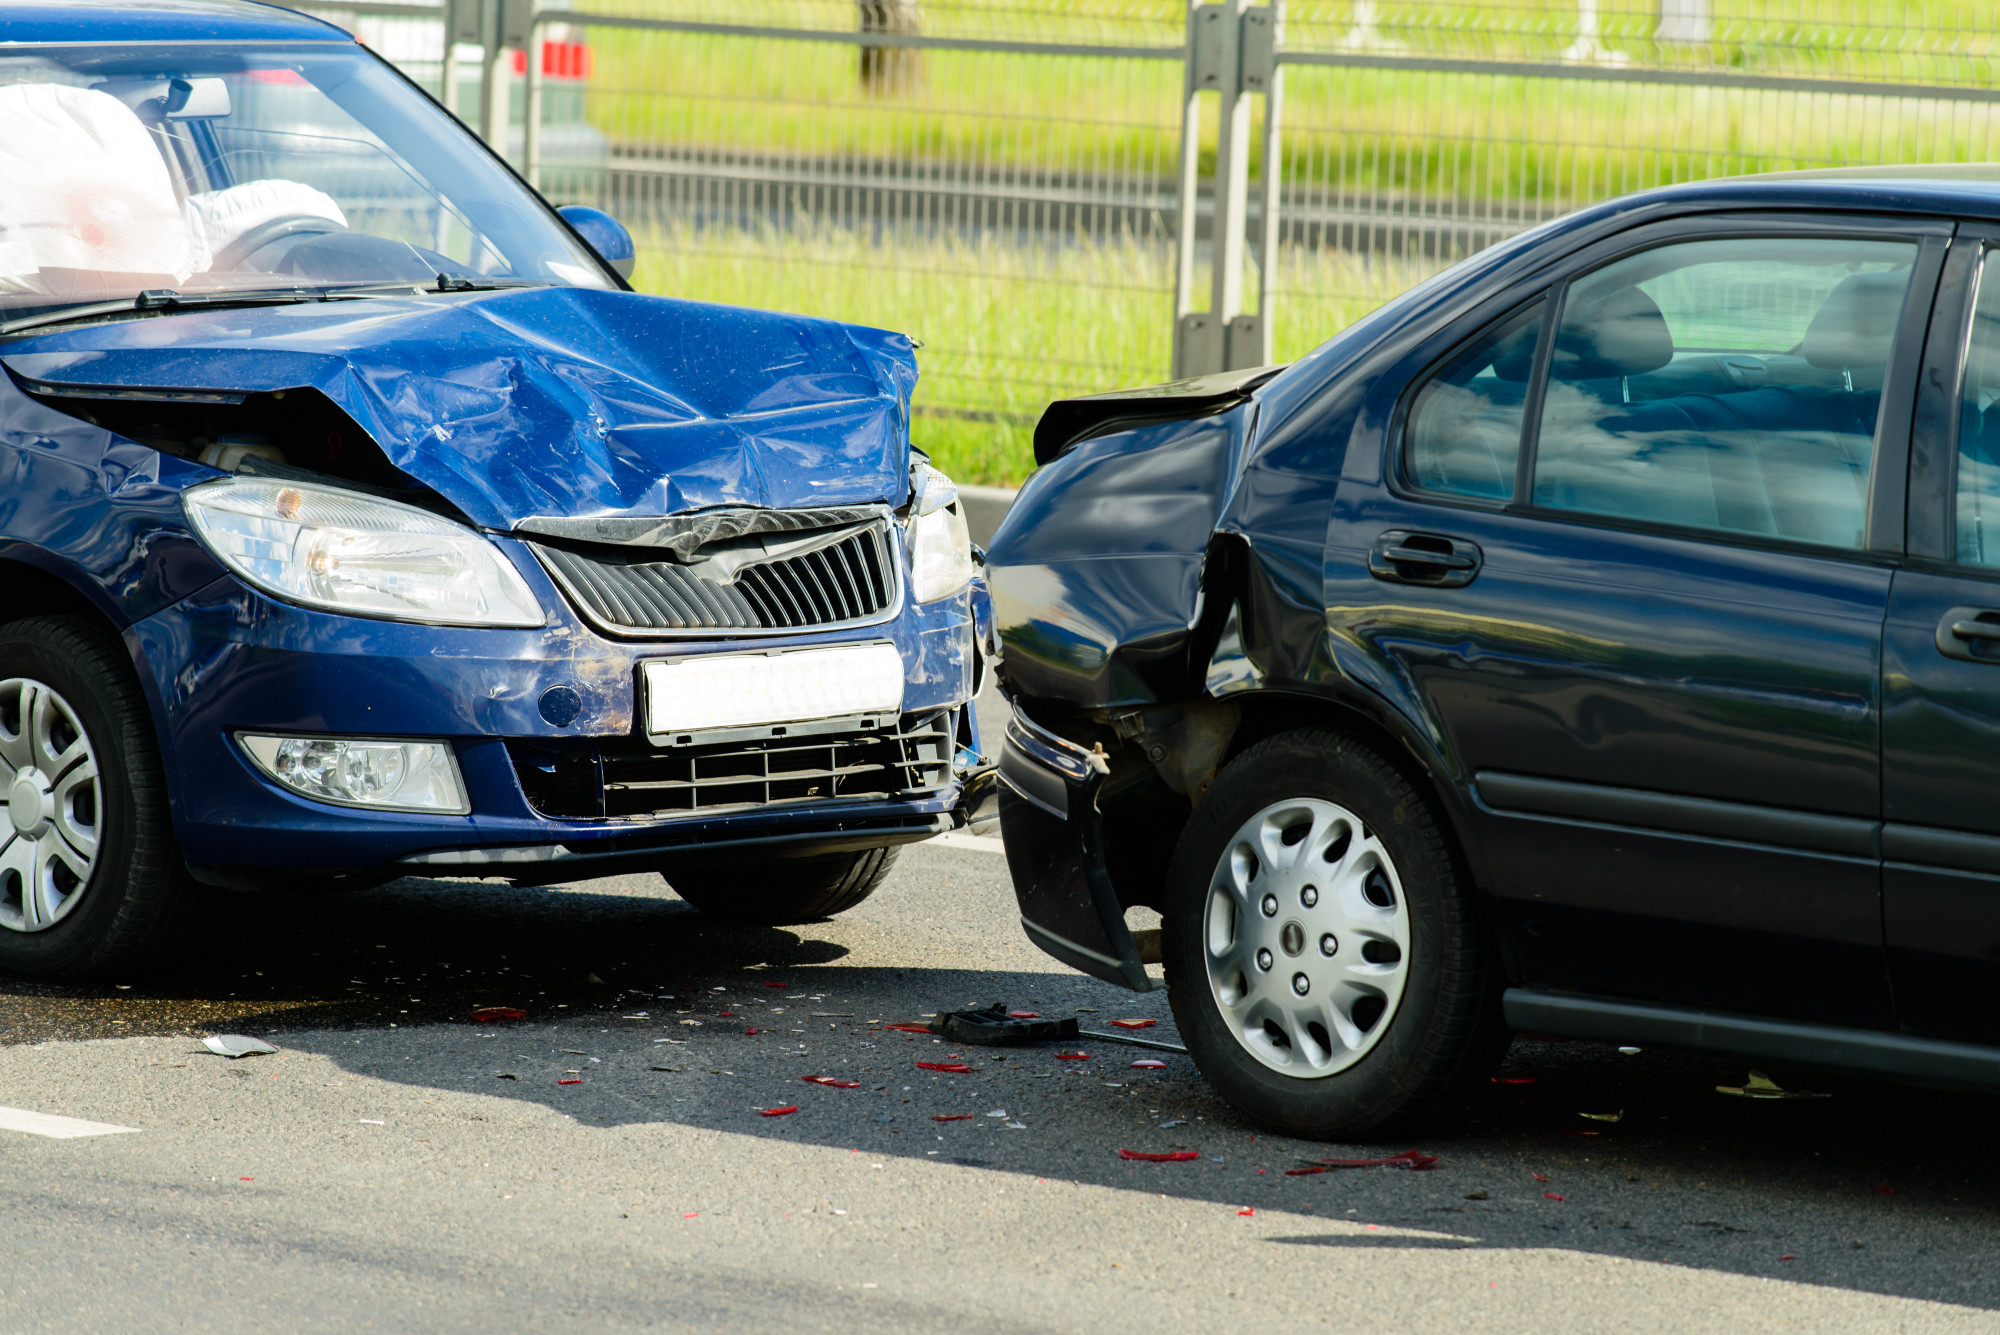 Have You Been In A Motor Vehicle Accident? Here’s What You Should Do Next.